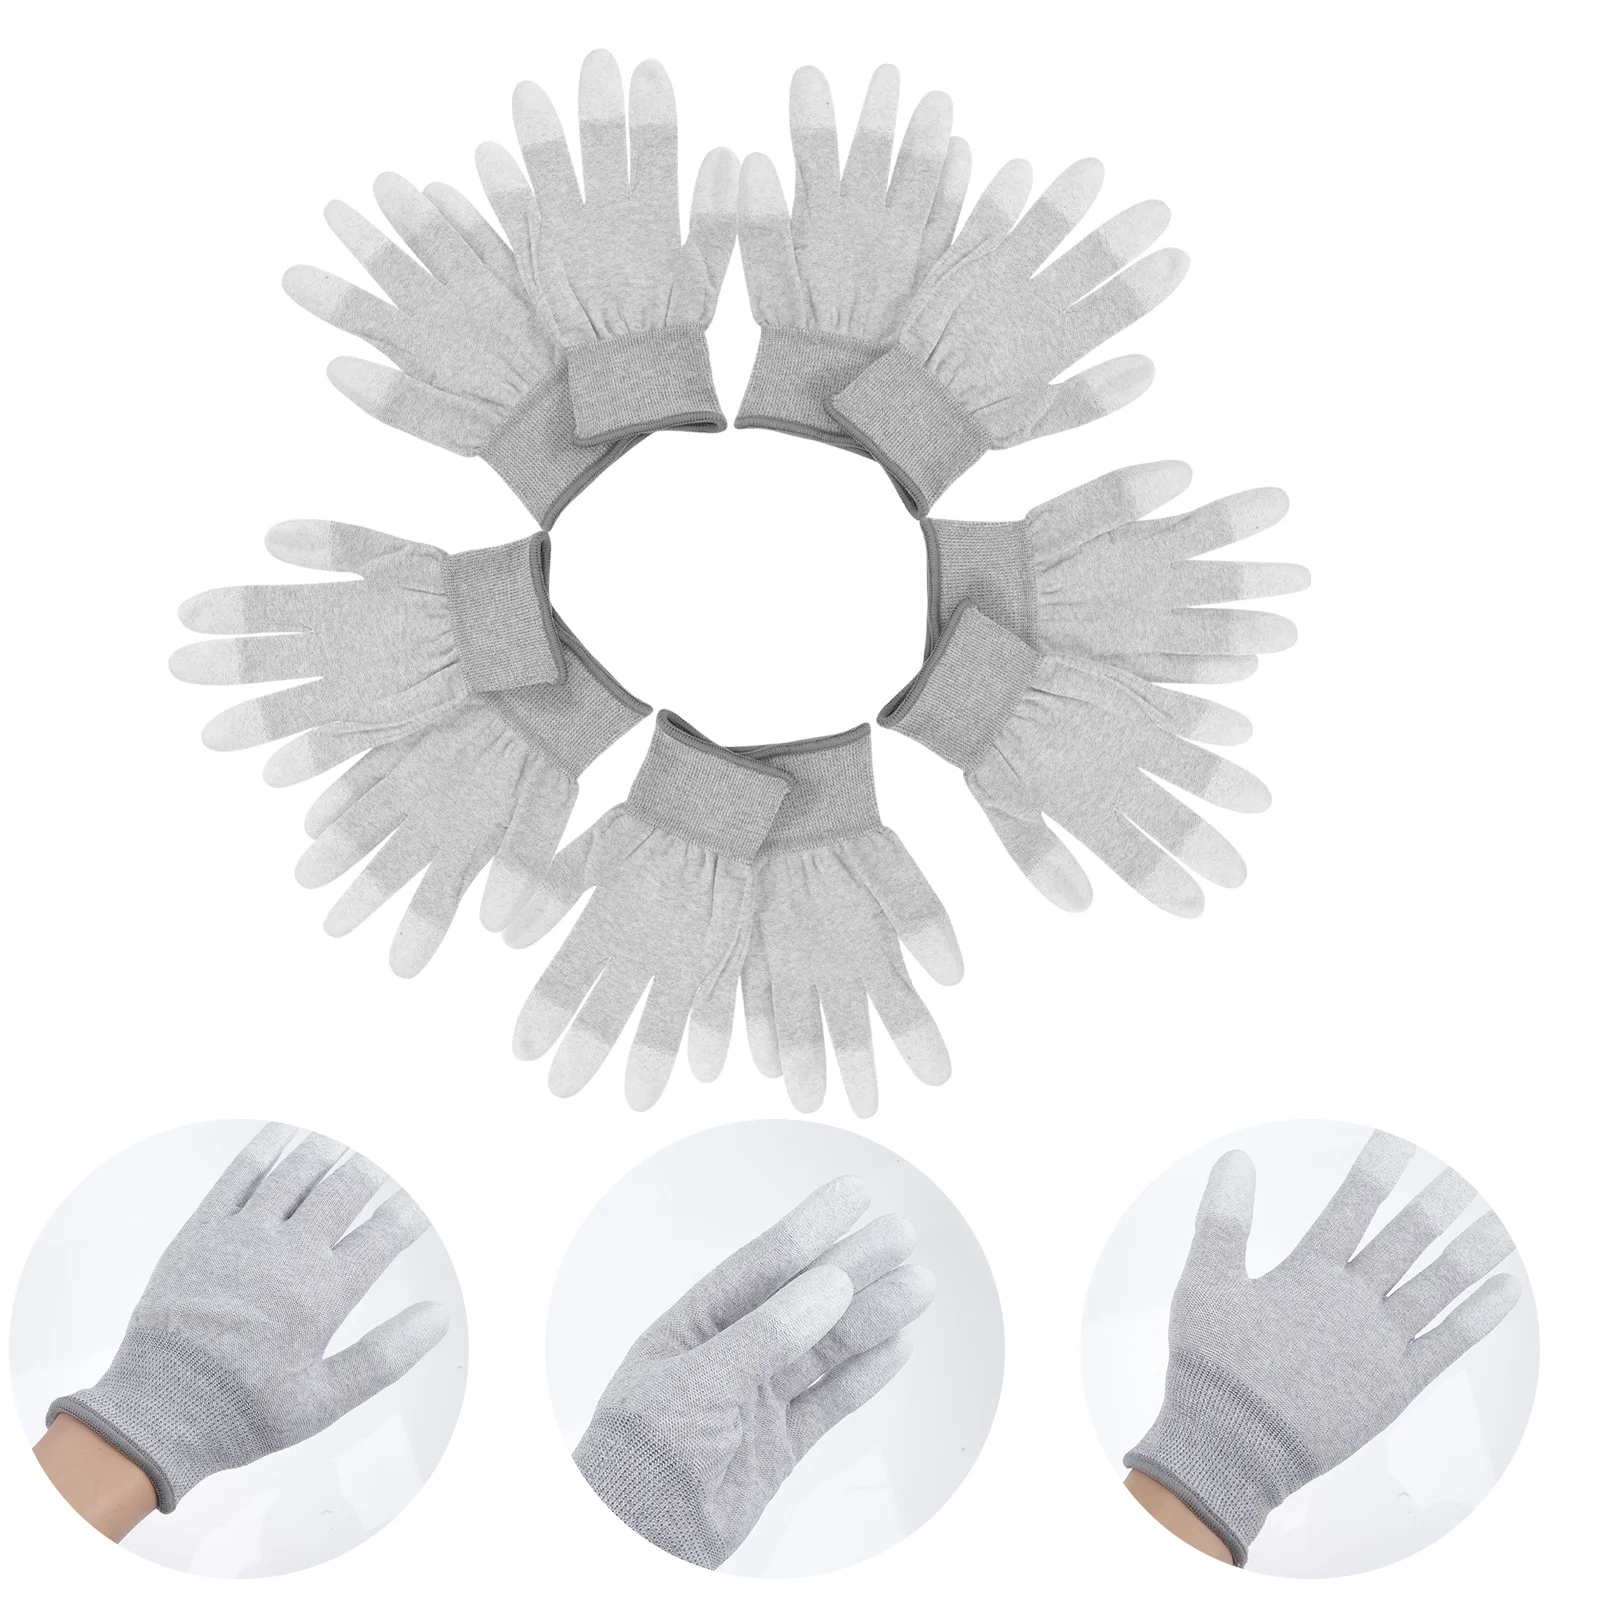 

5 Pairs Anti-static Gloves Work Non-slip Clean Coated Protection Carbon Fiber for Workers Working Protective Industry